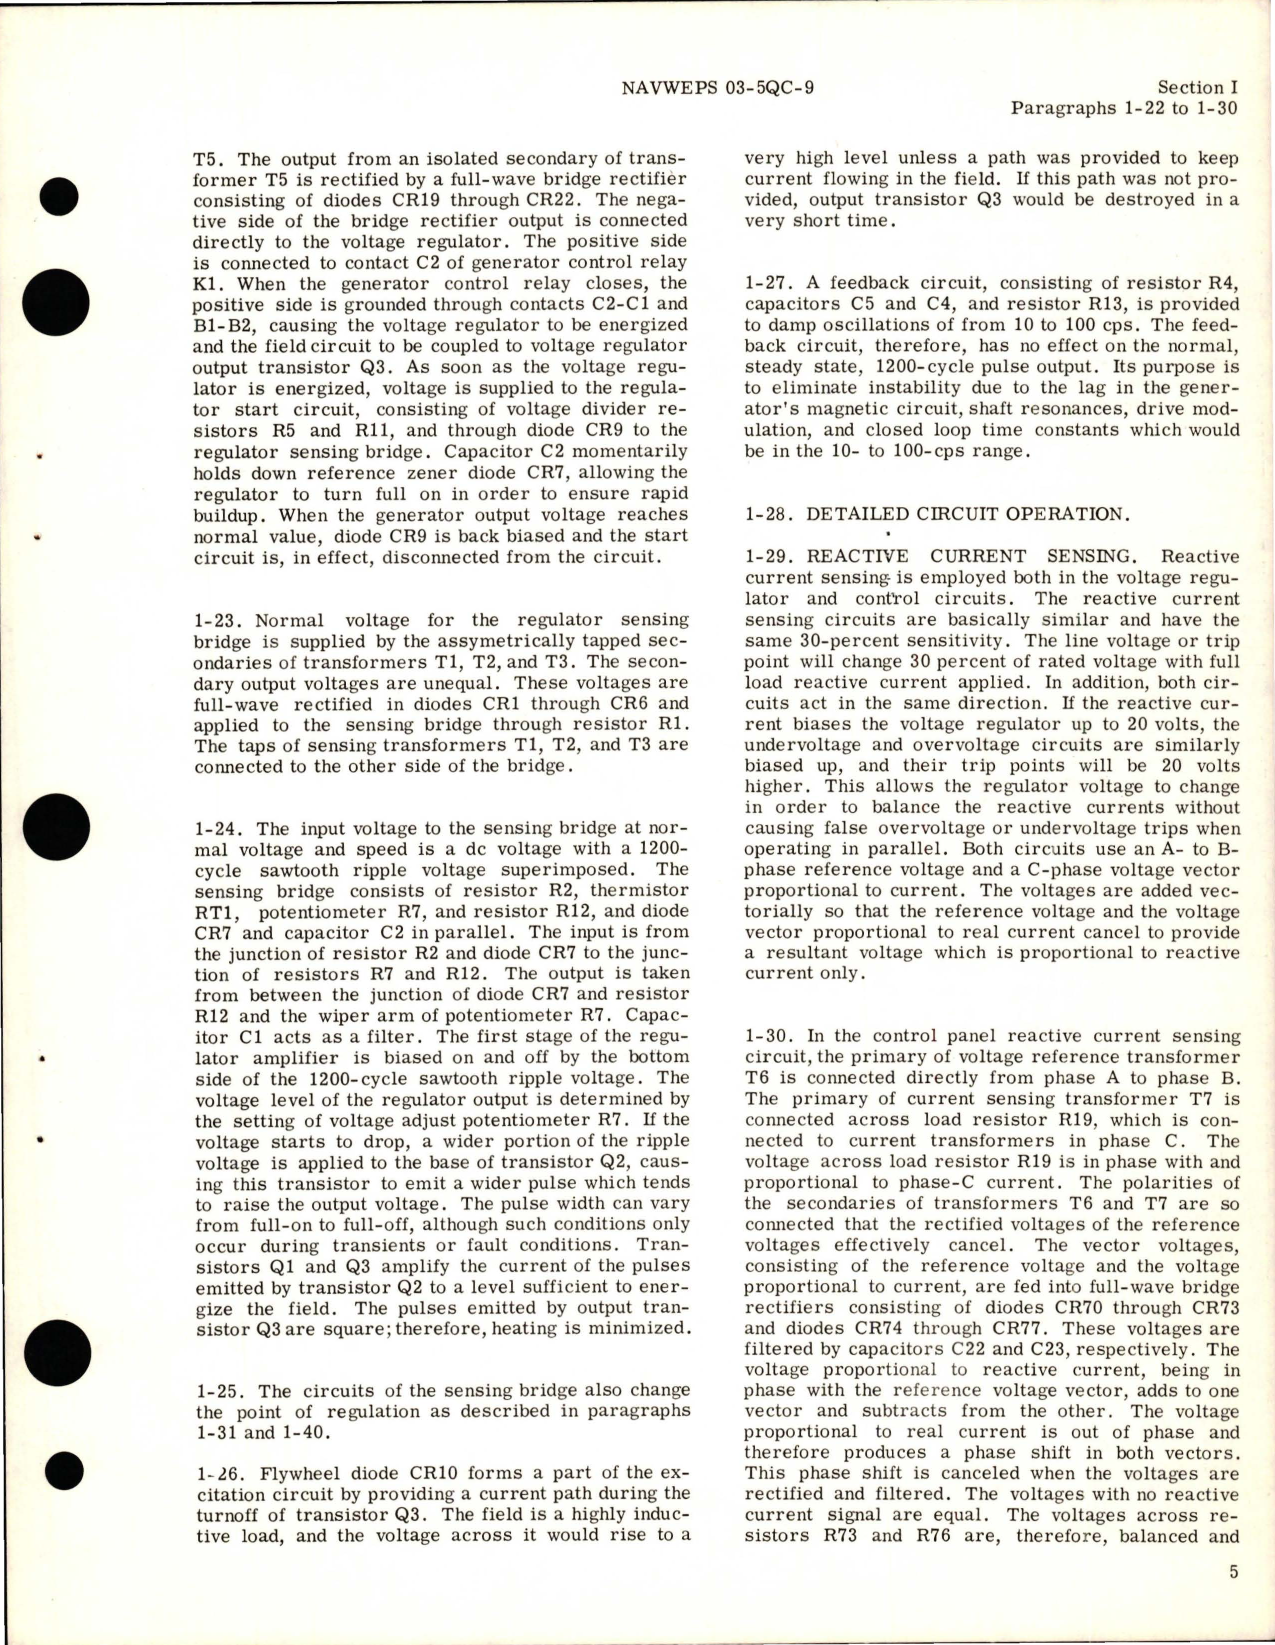 Sample page 9 from AirCorps Library document: Overhaul Instructions for Control Panel - Type 21B30-3-A